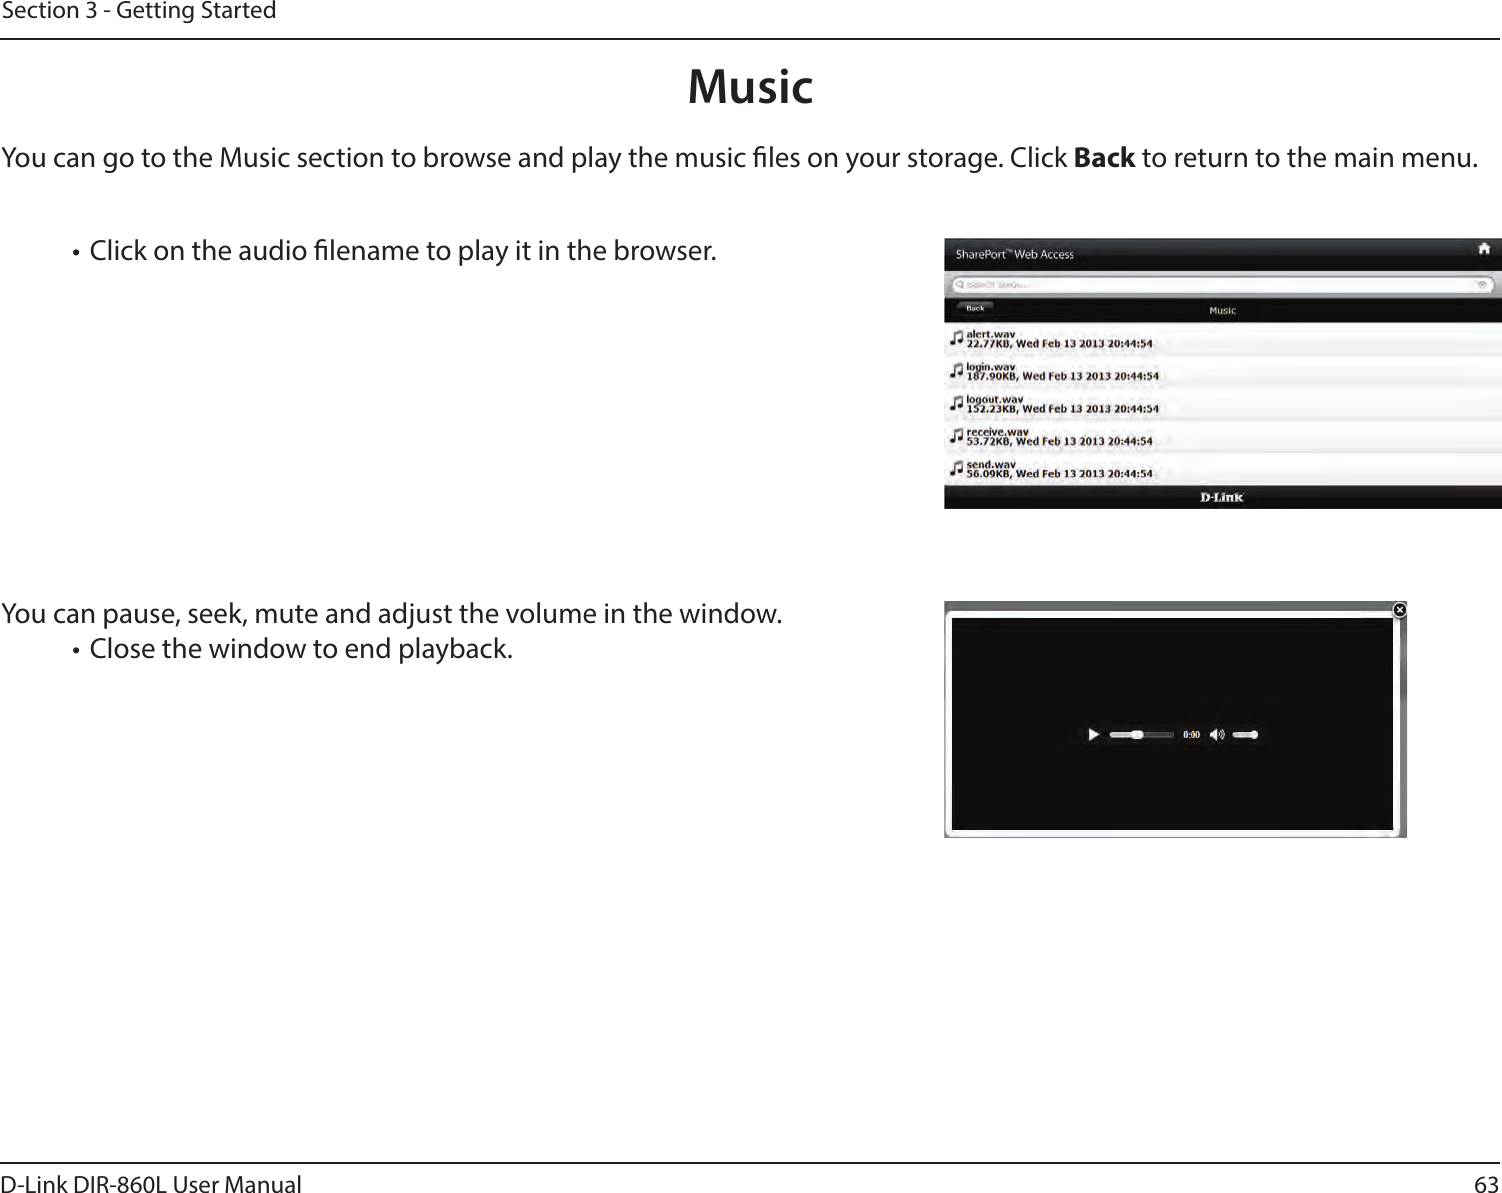 63D-Link DIR-860L User ManualSection 3 - Getting StartedMusicYou can go to the Music section to browse and play the music les on your storage. Click Back to return to the main menu.• Click on the audio lename to play it in the browser.You can pause, seek, mute and adjust the volume in the window.• Close the window to end playback.